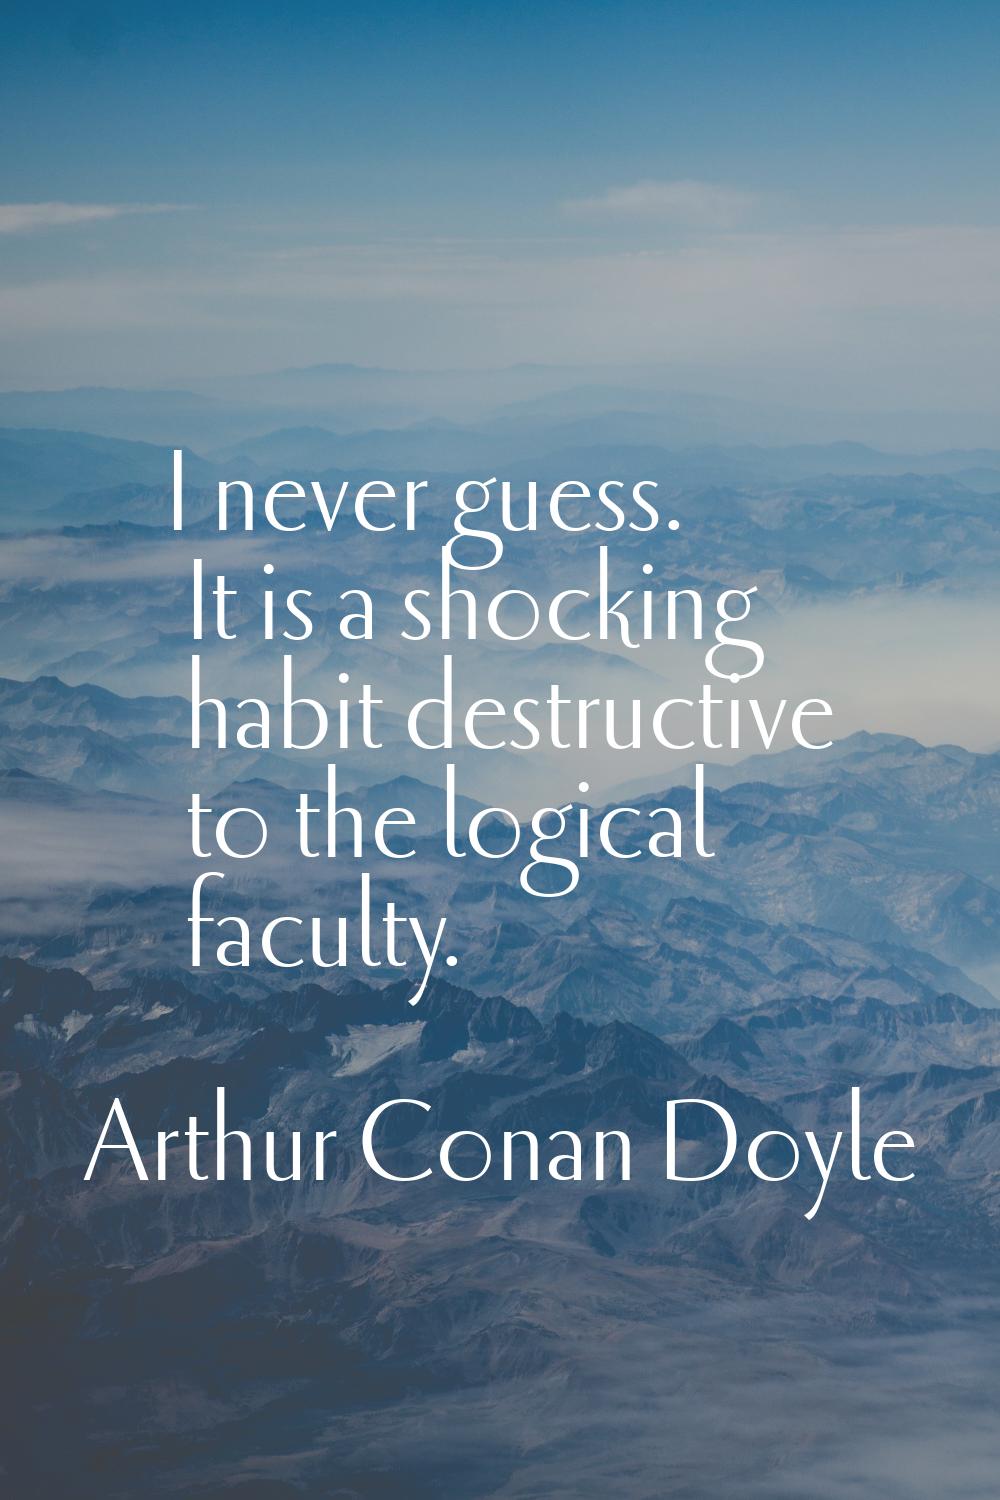 I never guess. It is a shocking habit destructive to the logical faculty.